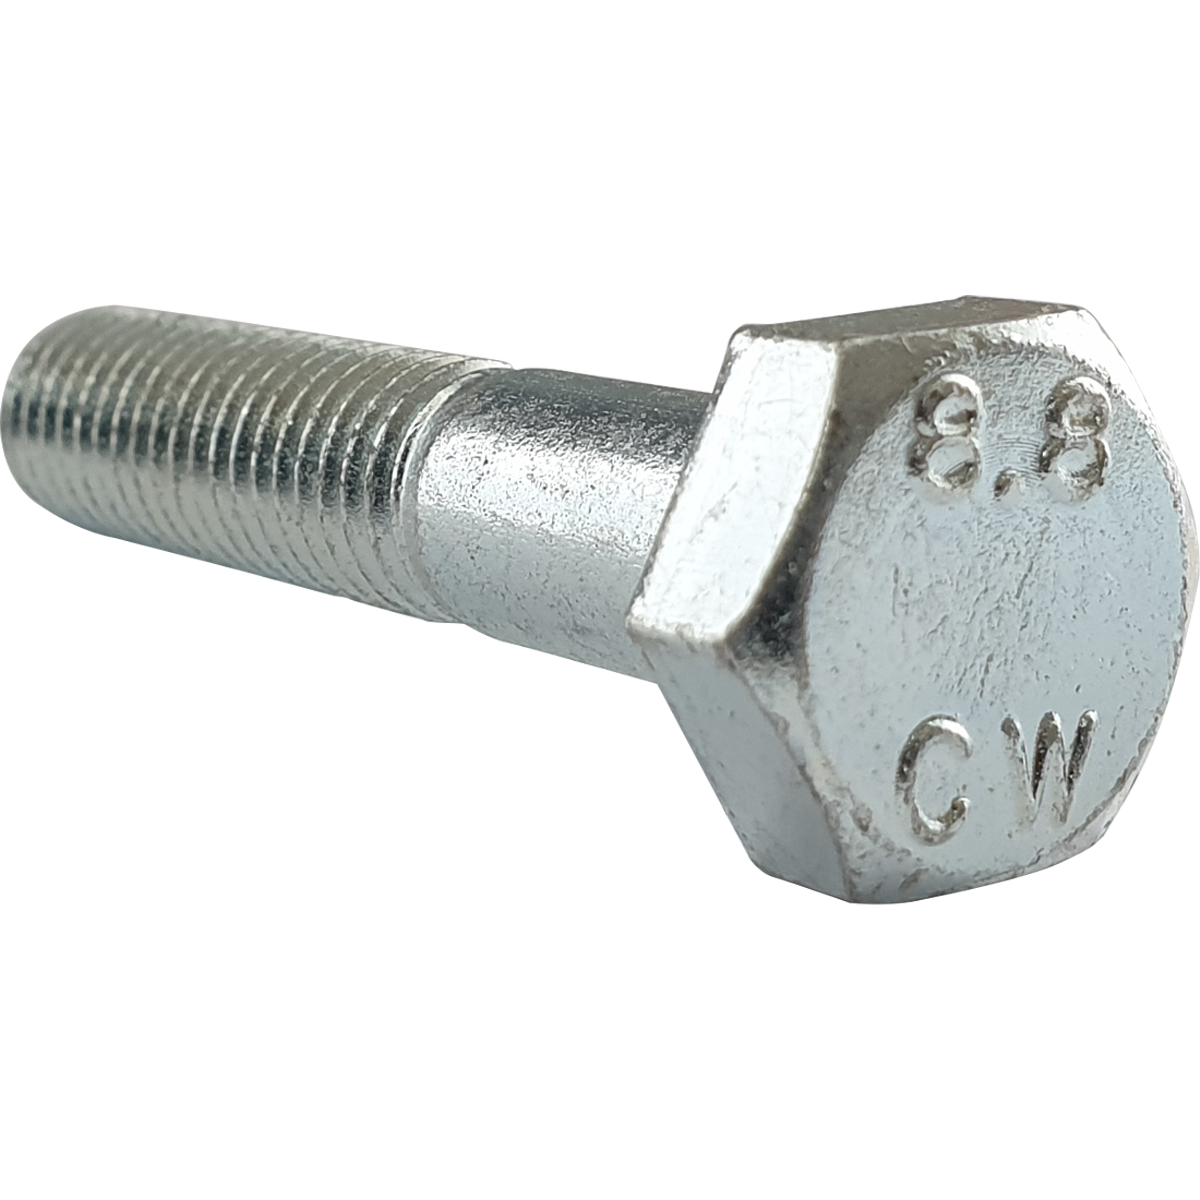 UNC, BZP, part thread hex bolts which are also know as hexagon bolts, or hex head bolts.